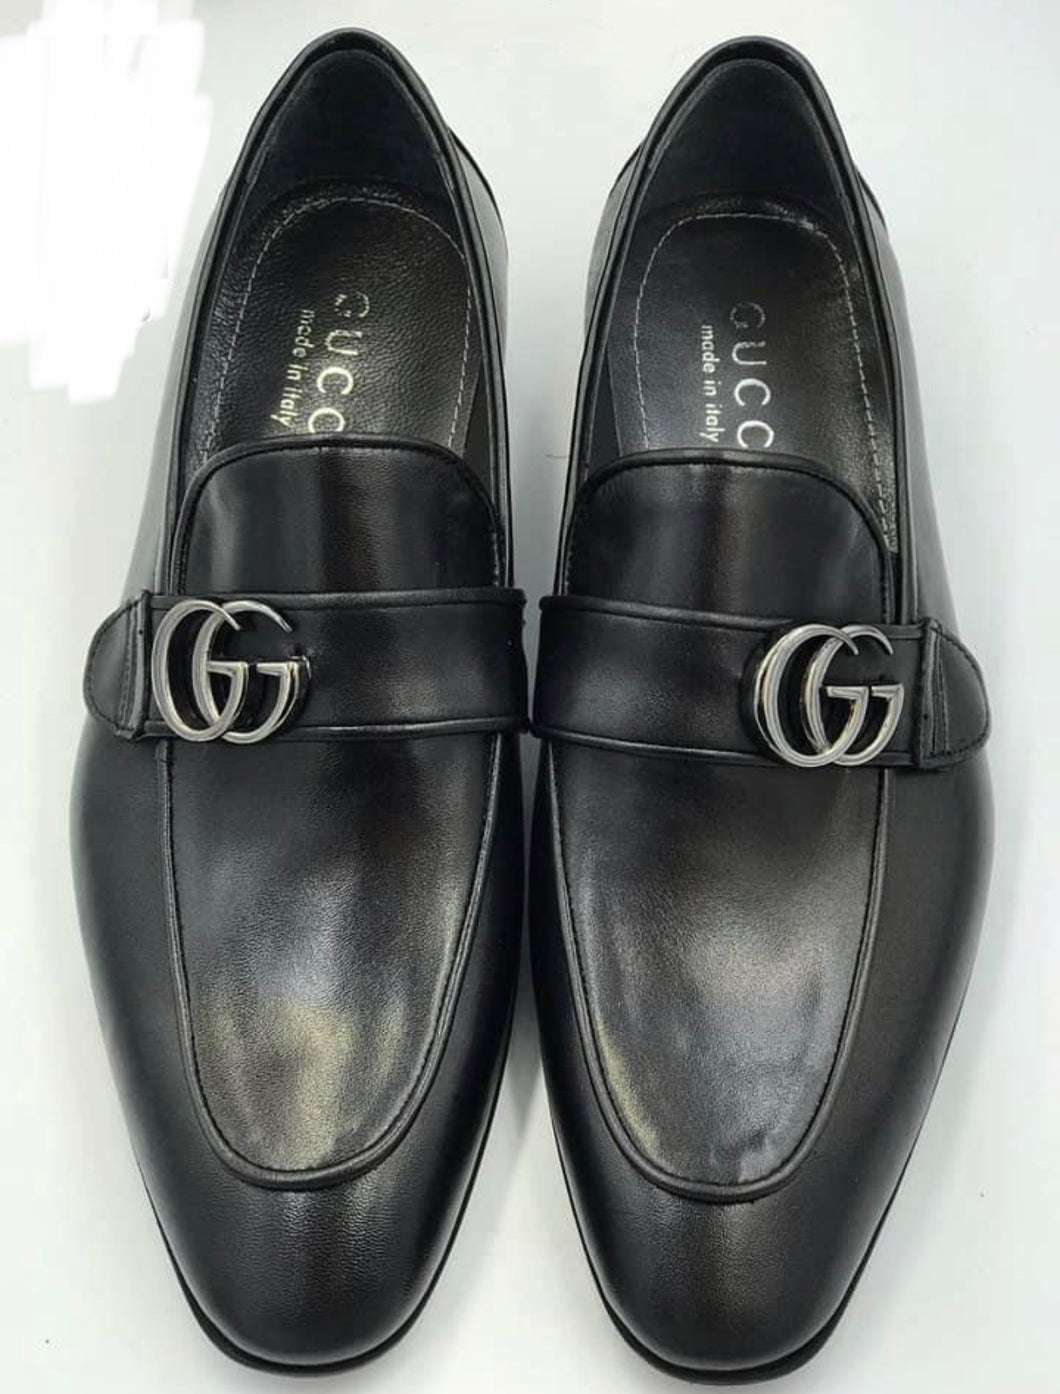 Black GG loafers